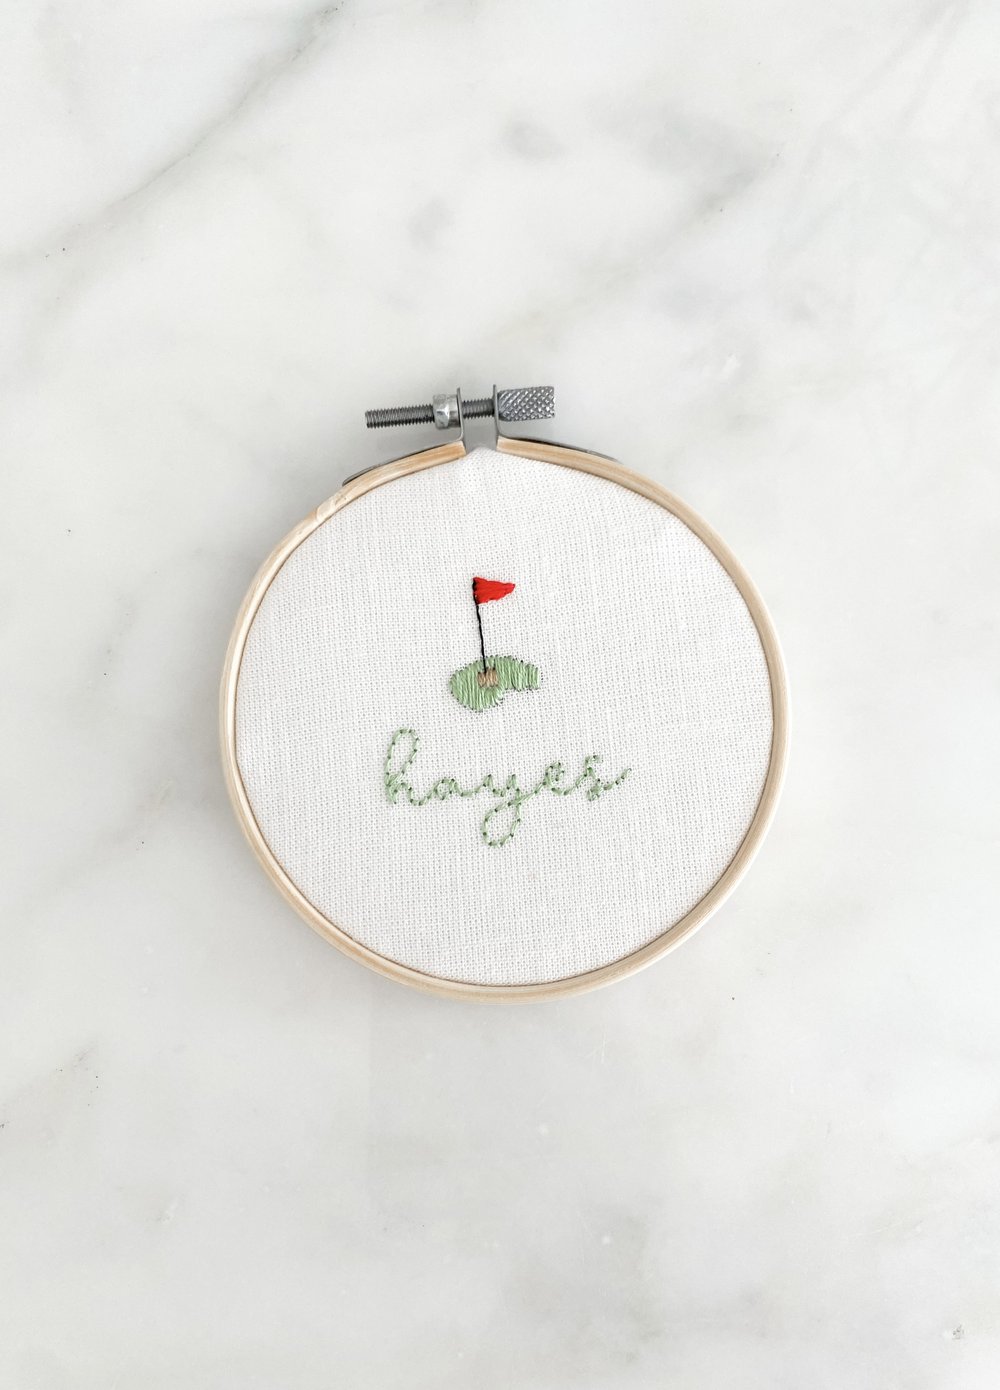 Online] Fill Stitch Embroidery Class – Assembly: gather + create